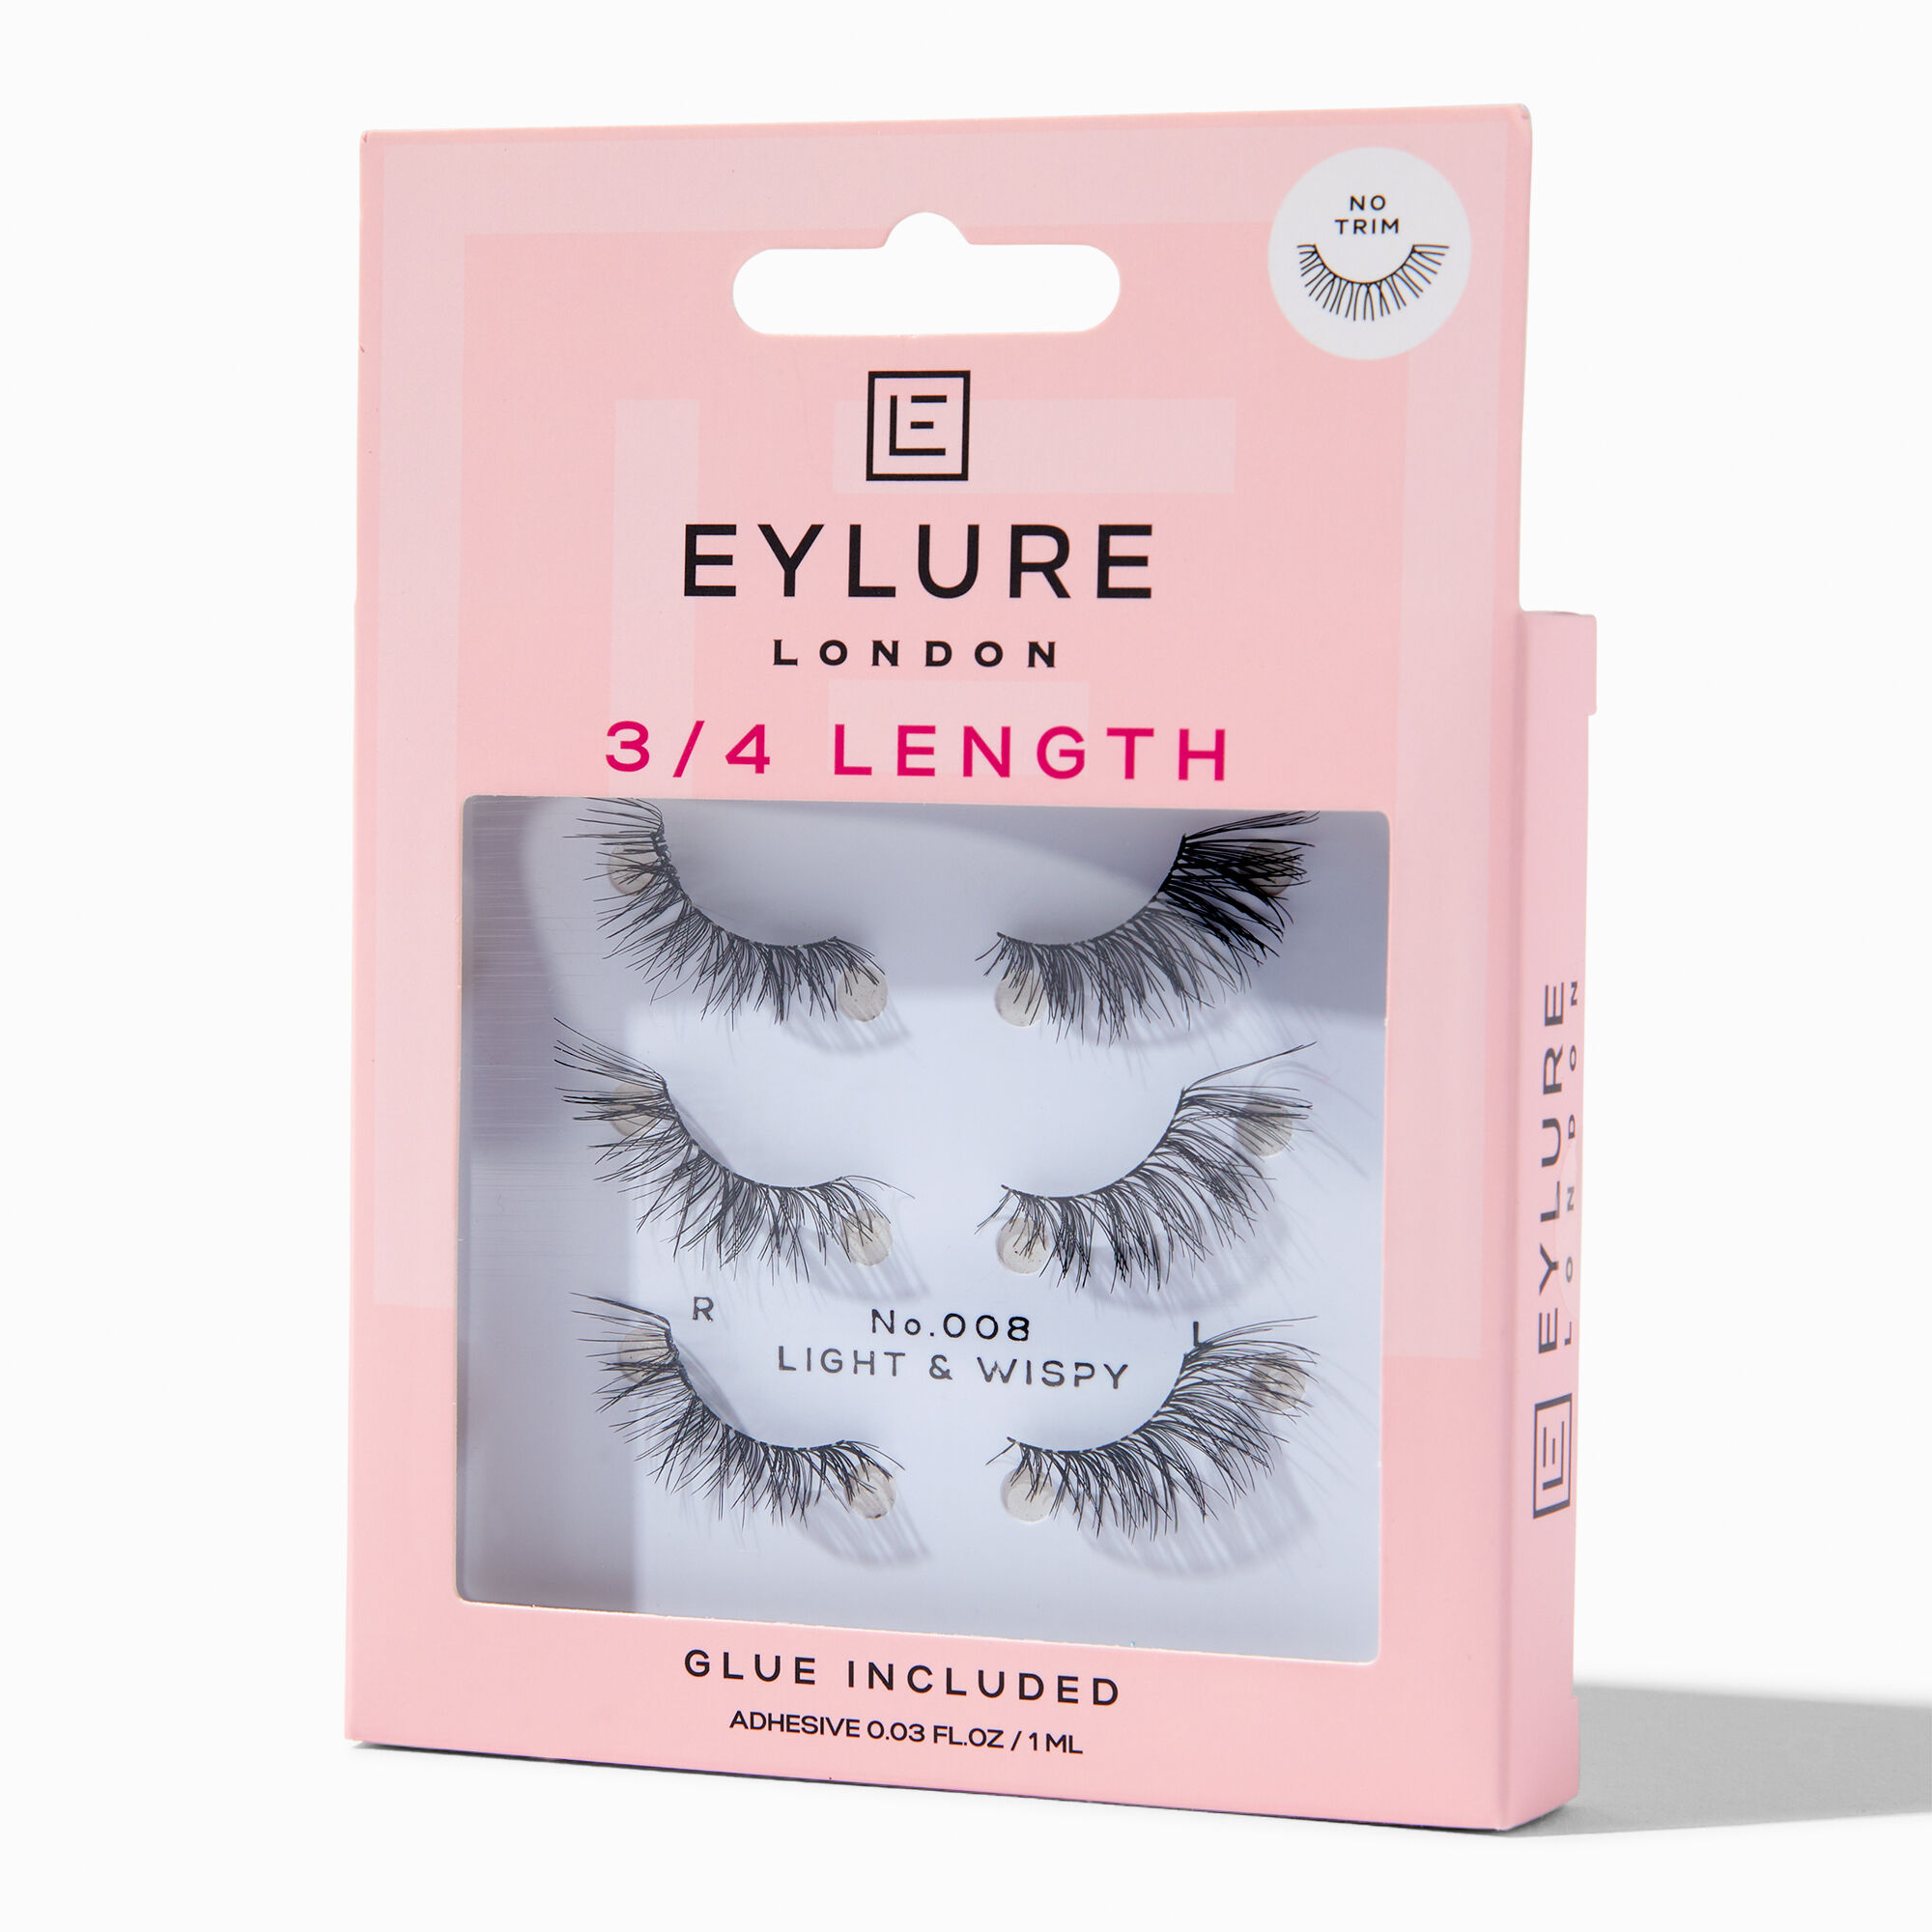 View Claires Eylure 34 Length False Lashes No 008 3 Pack information